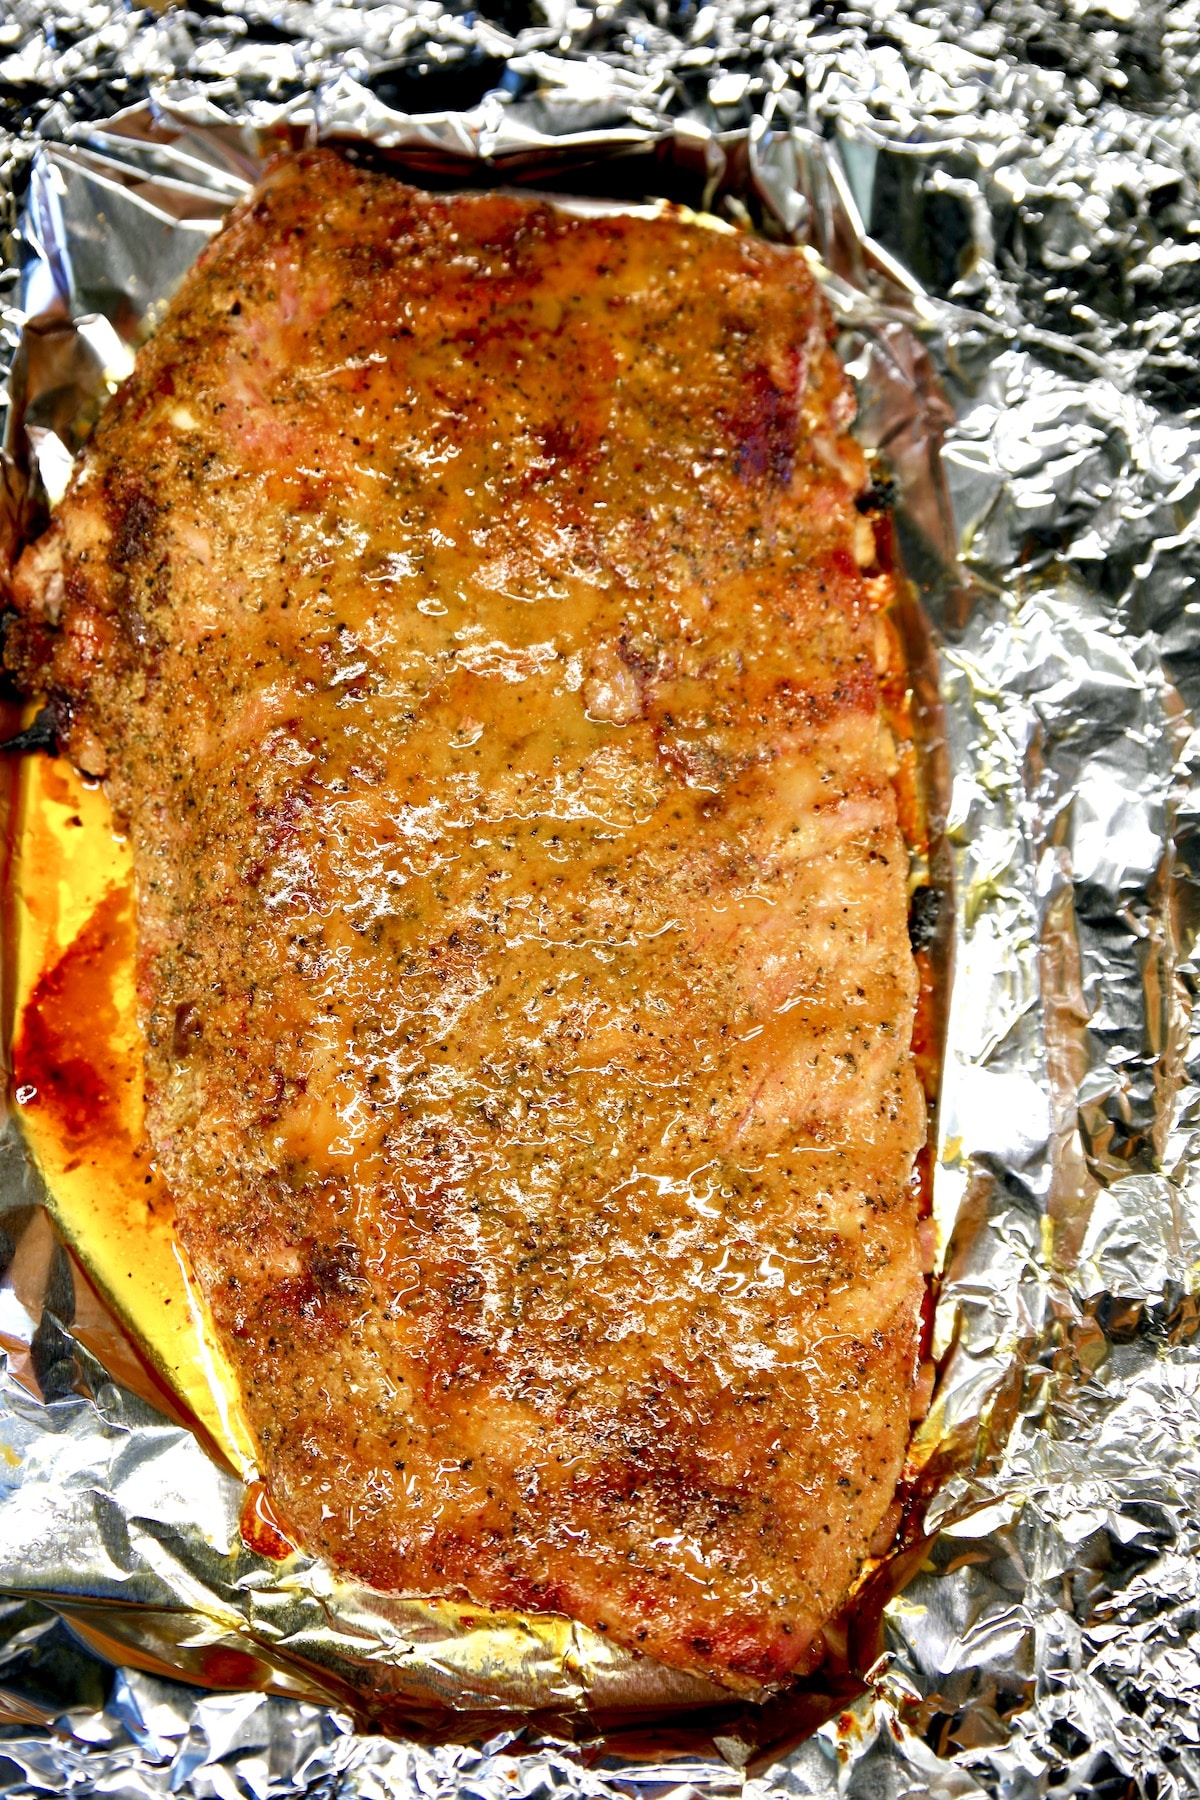 Grilled spare ribs with sweet mustard glaze.